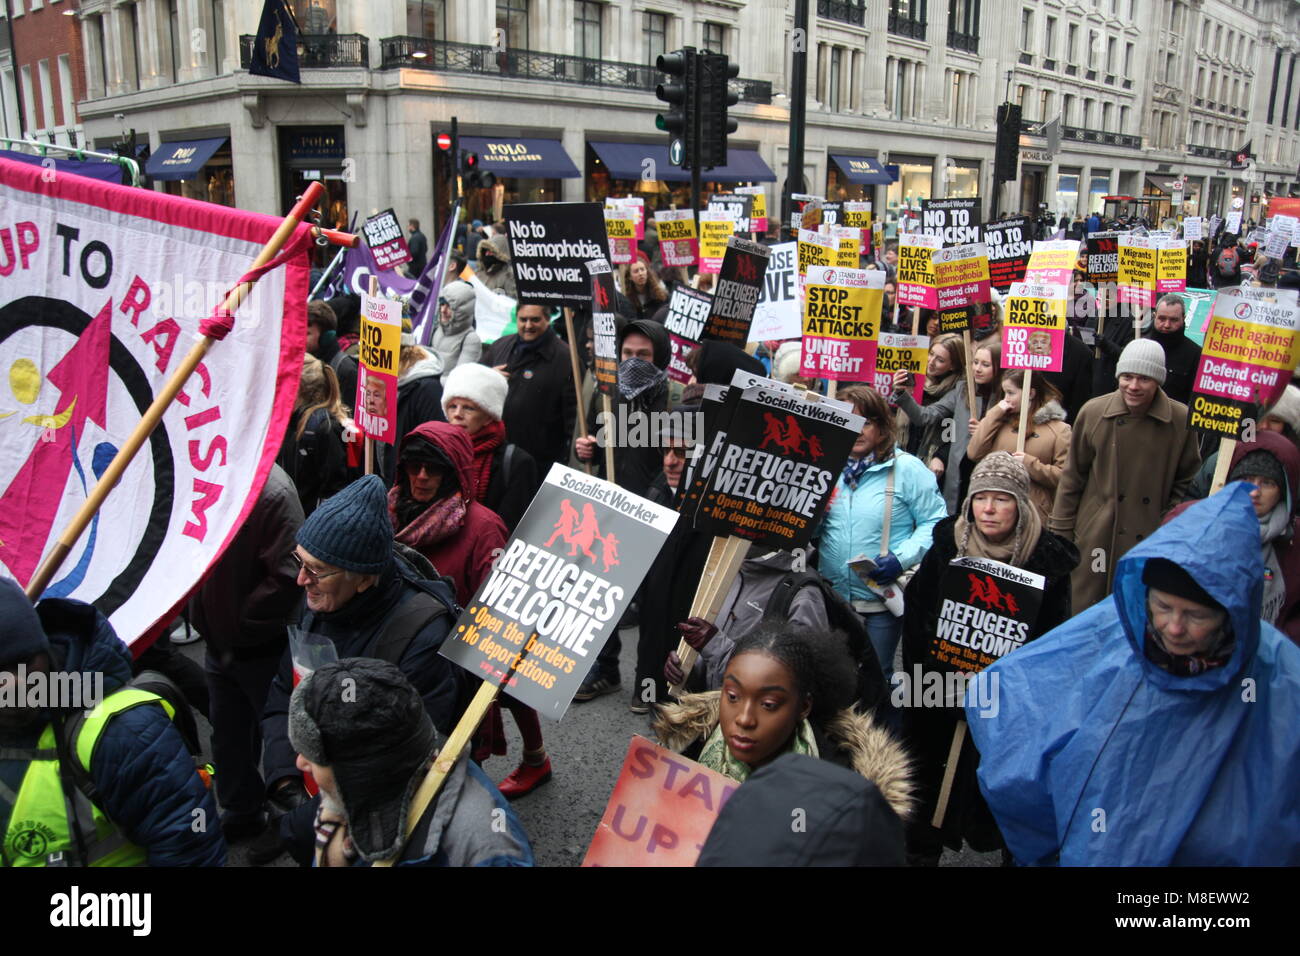 London, UK, 17 Mar 2018. Protesters at the UN Anti-Racism March in London Credit: Alex Cavendish/Alamy Live News Stock Photo